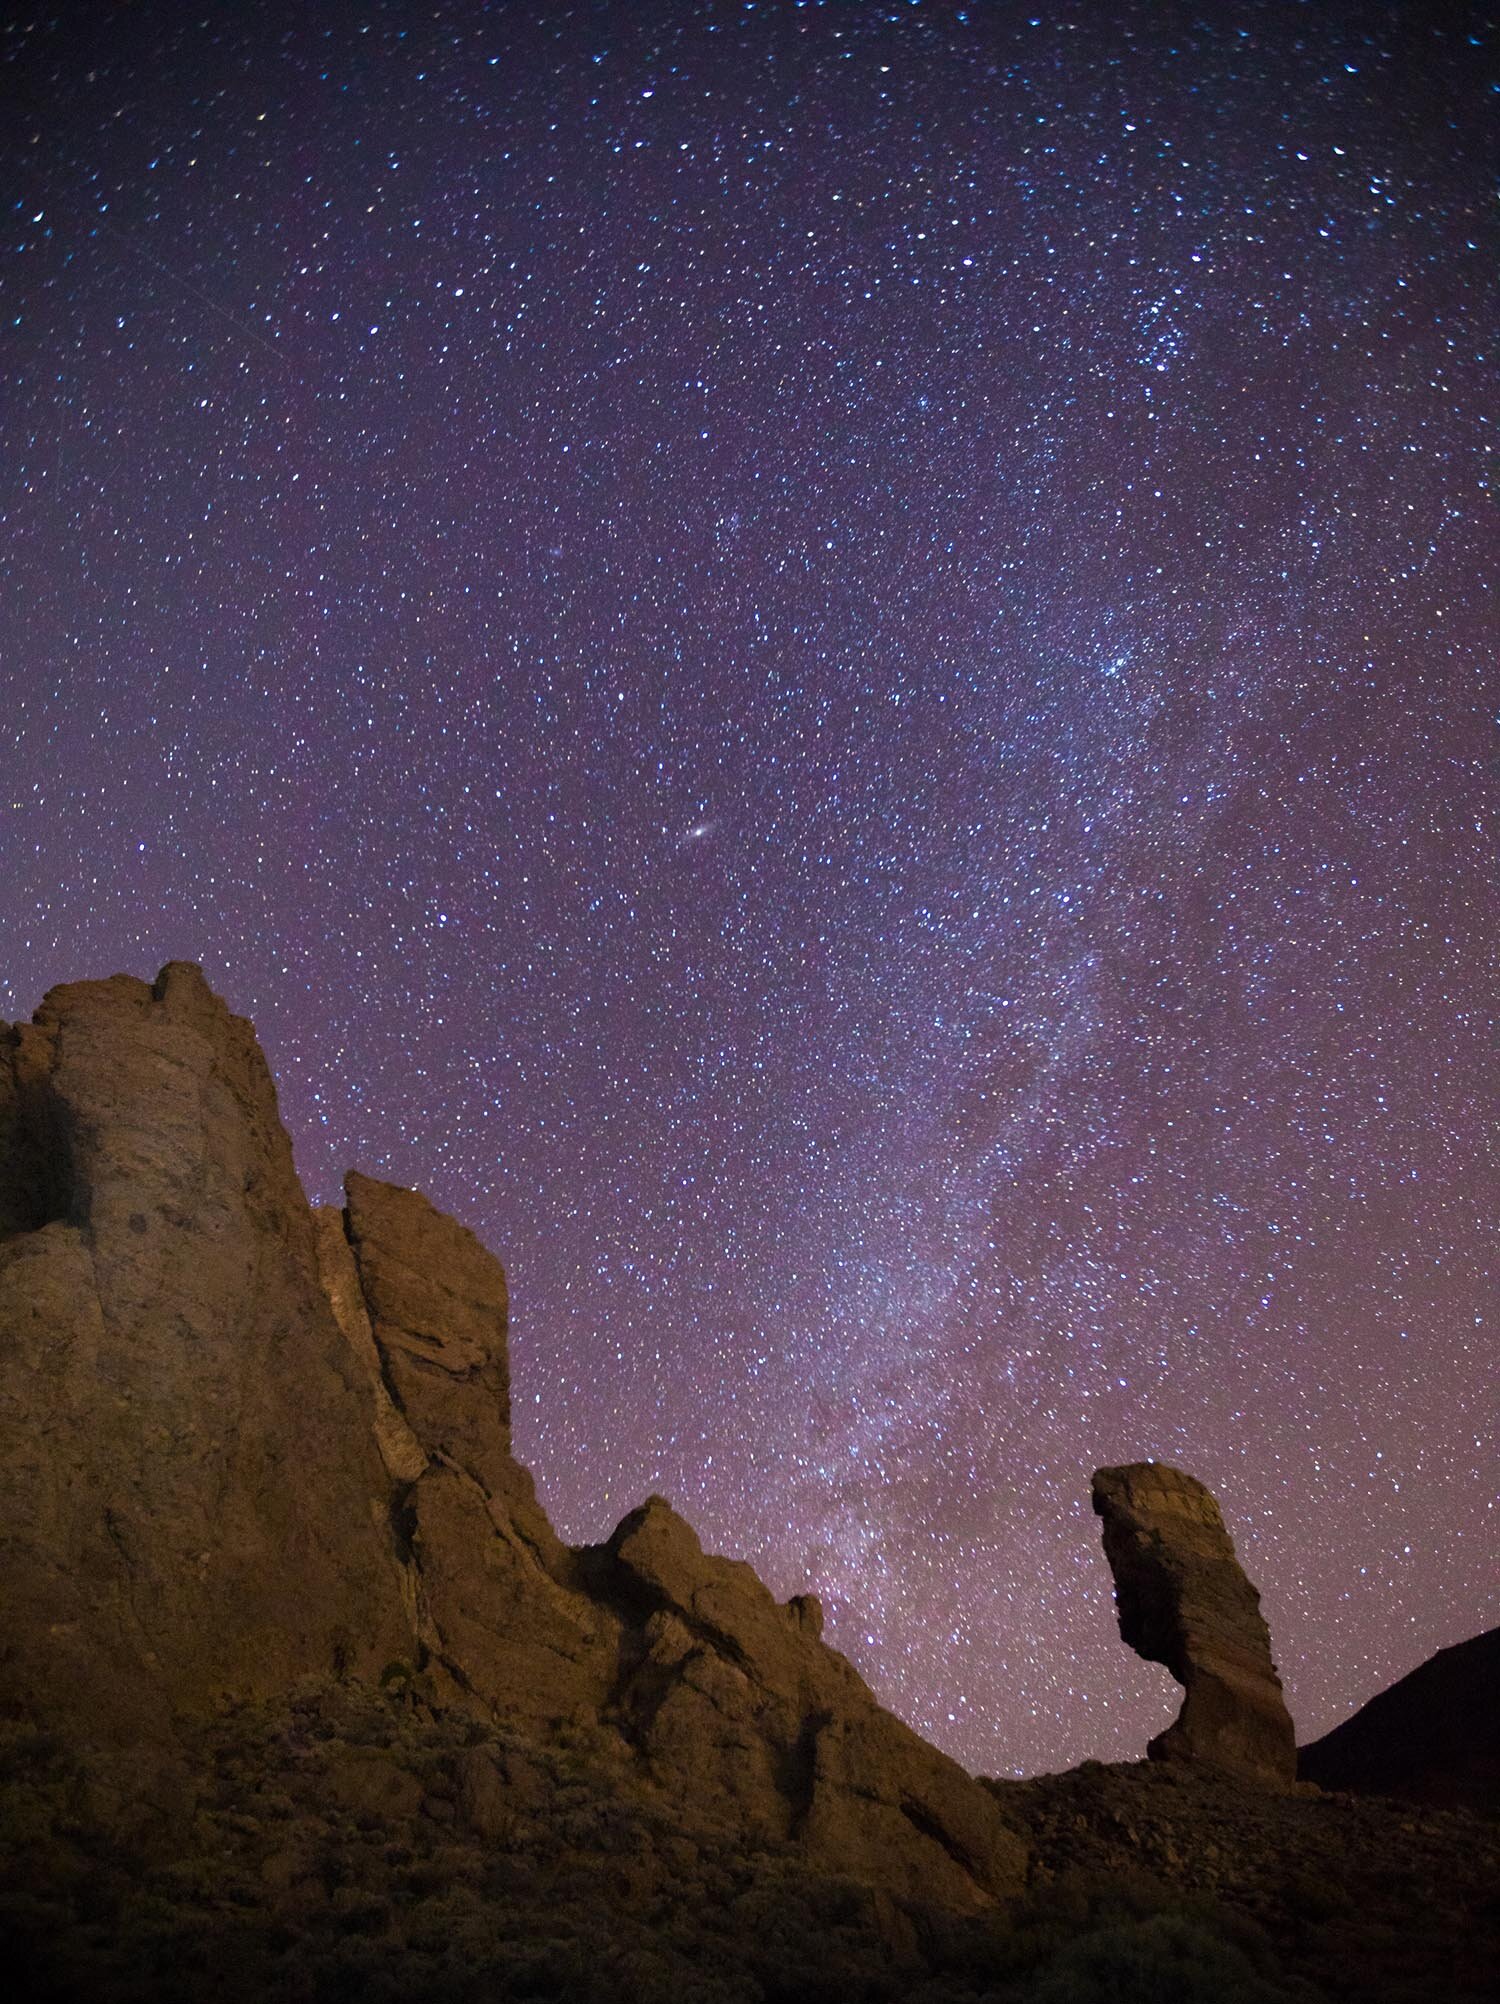 Picture of stars with rocks lit in the foreground